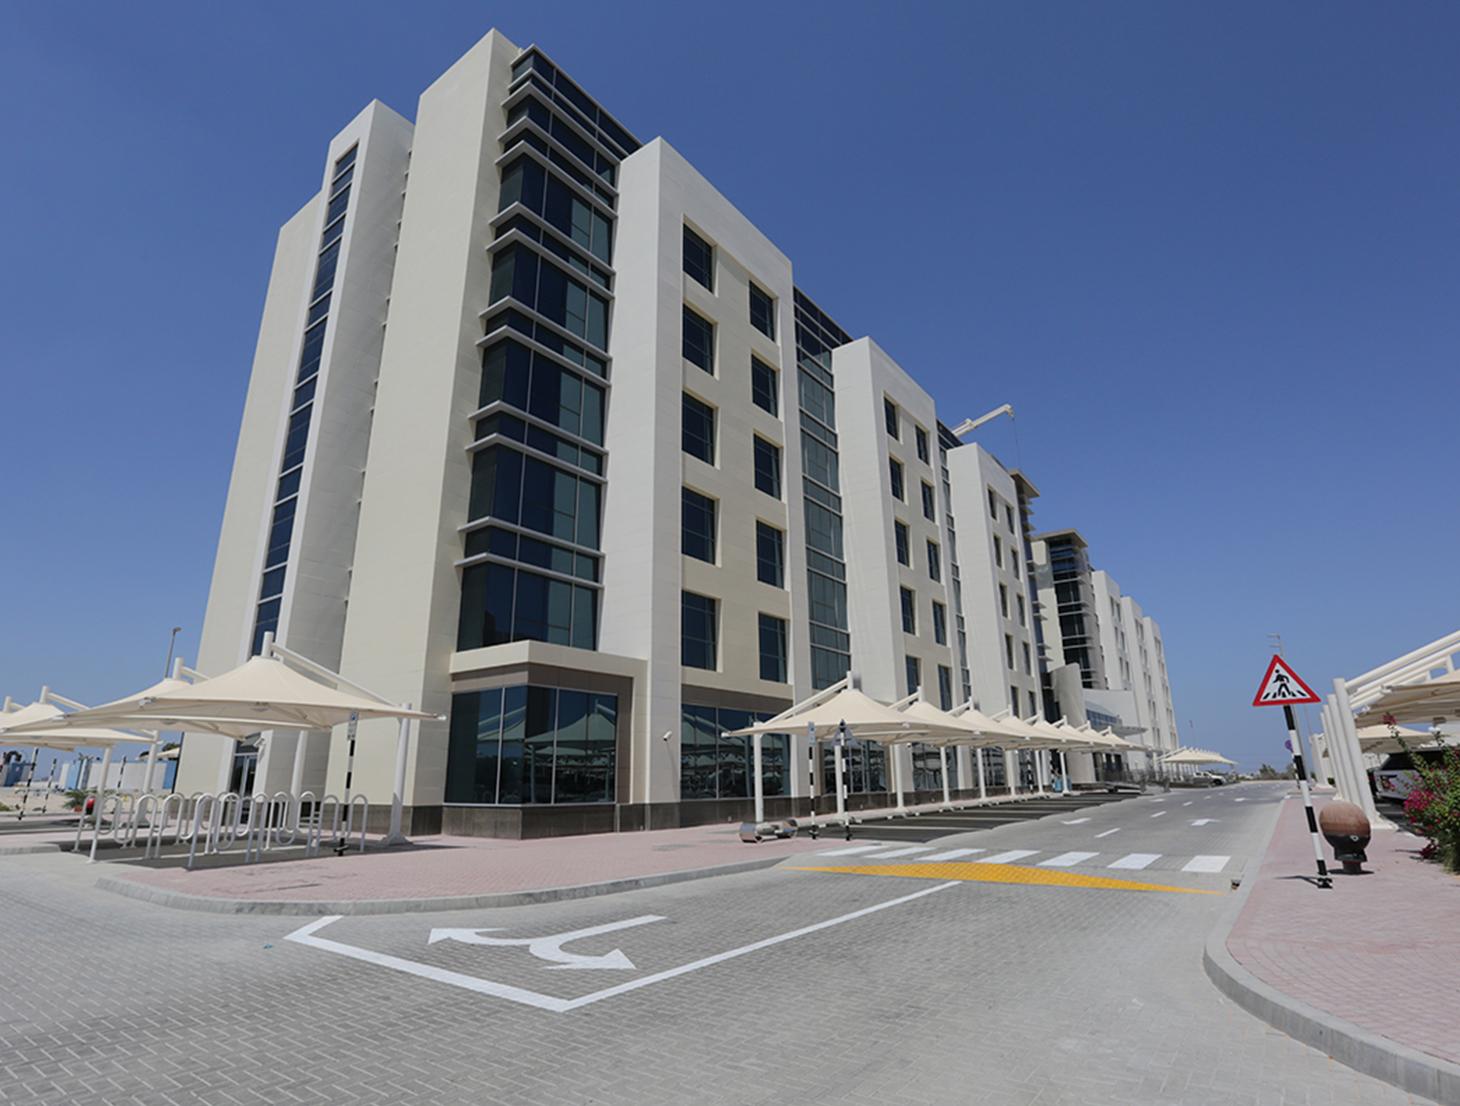 NEW GUEST HOUSE ADNOC